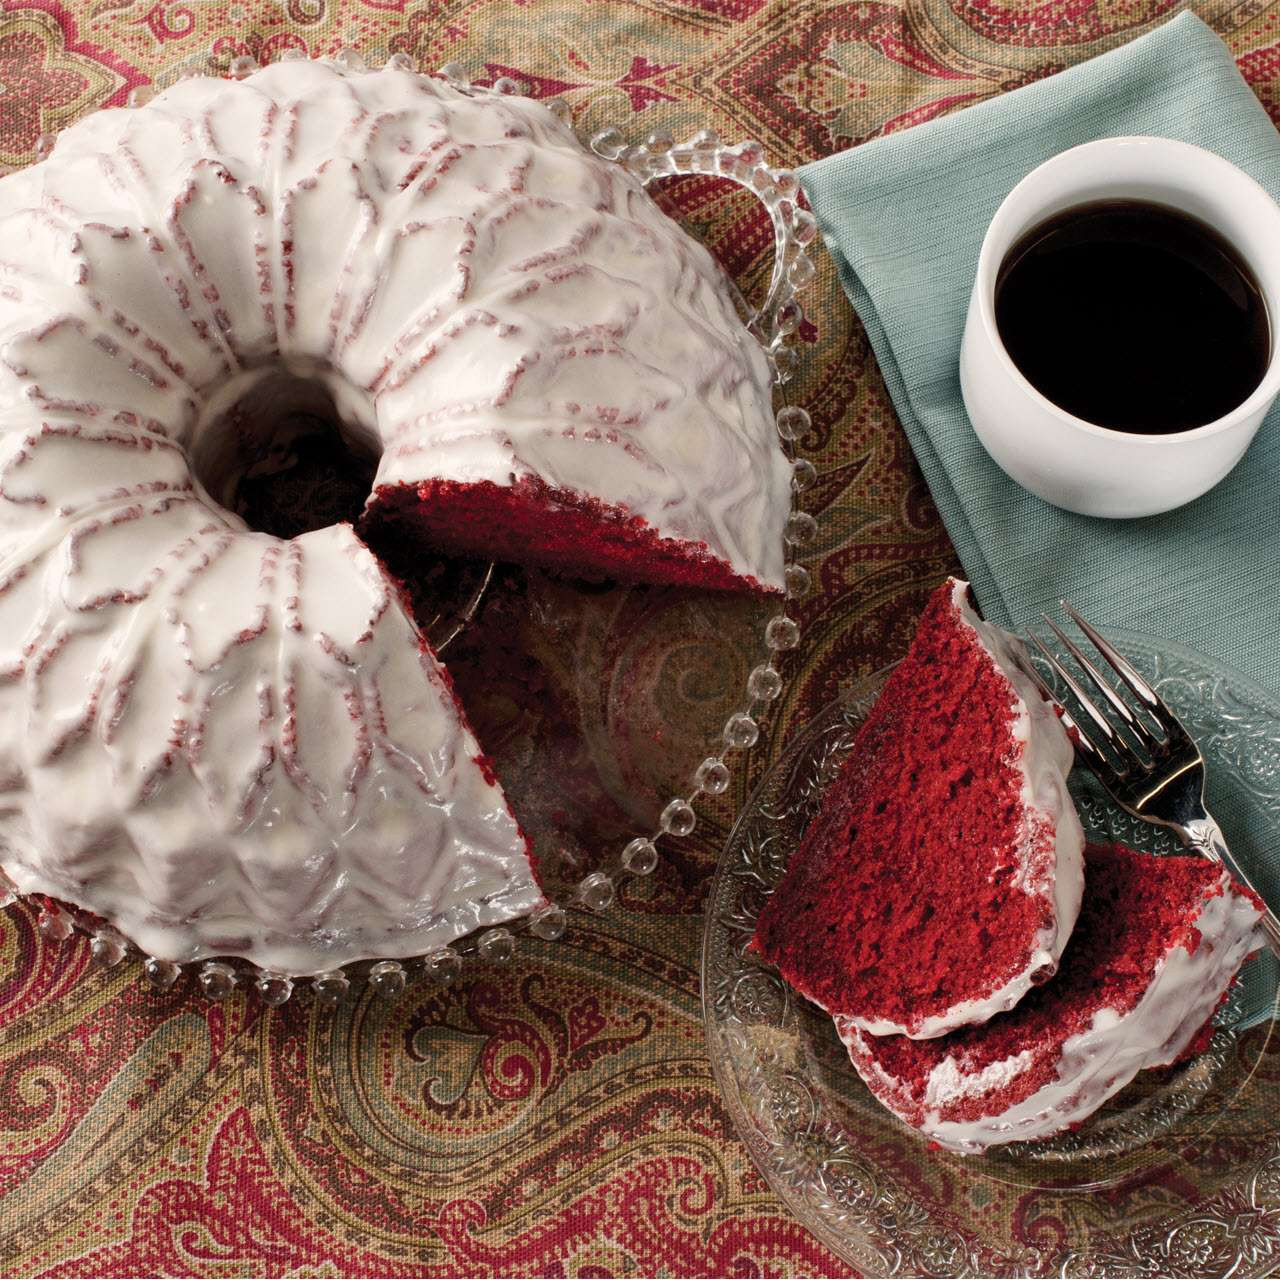 https://cdn11.bigcommerce.com/s-21kj3ntgv1/images/stencil/1280x1280/products/447/2012/NordicWare-Stainled-Glass-Bundt-Pan-with-White-Glazed-Cake-with-coffee__77861.1637175309.jpg?c=2